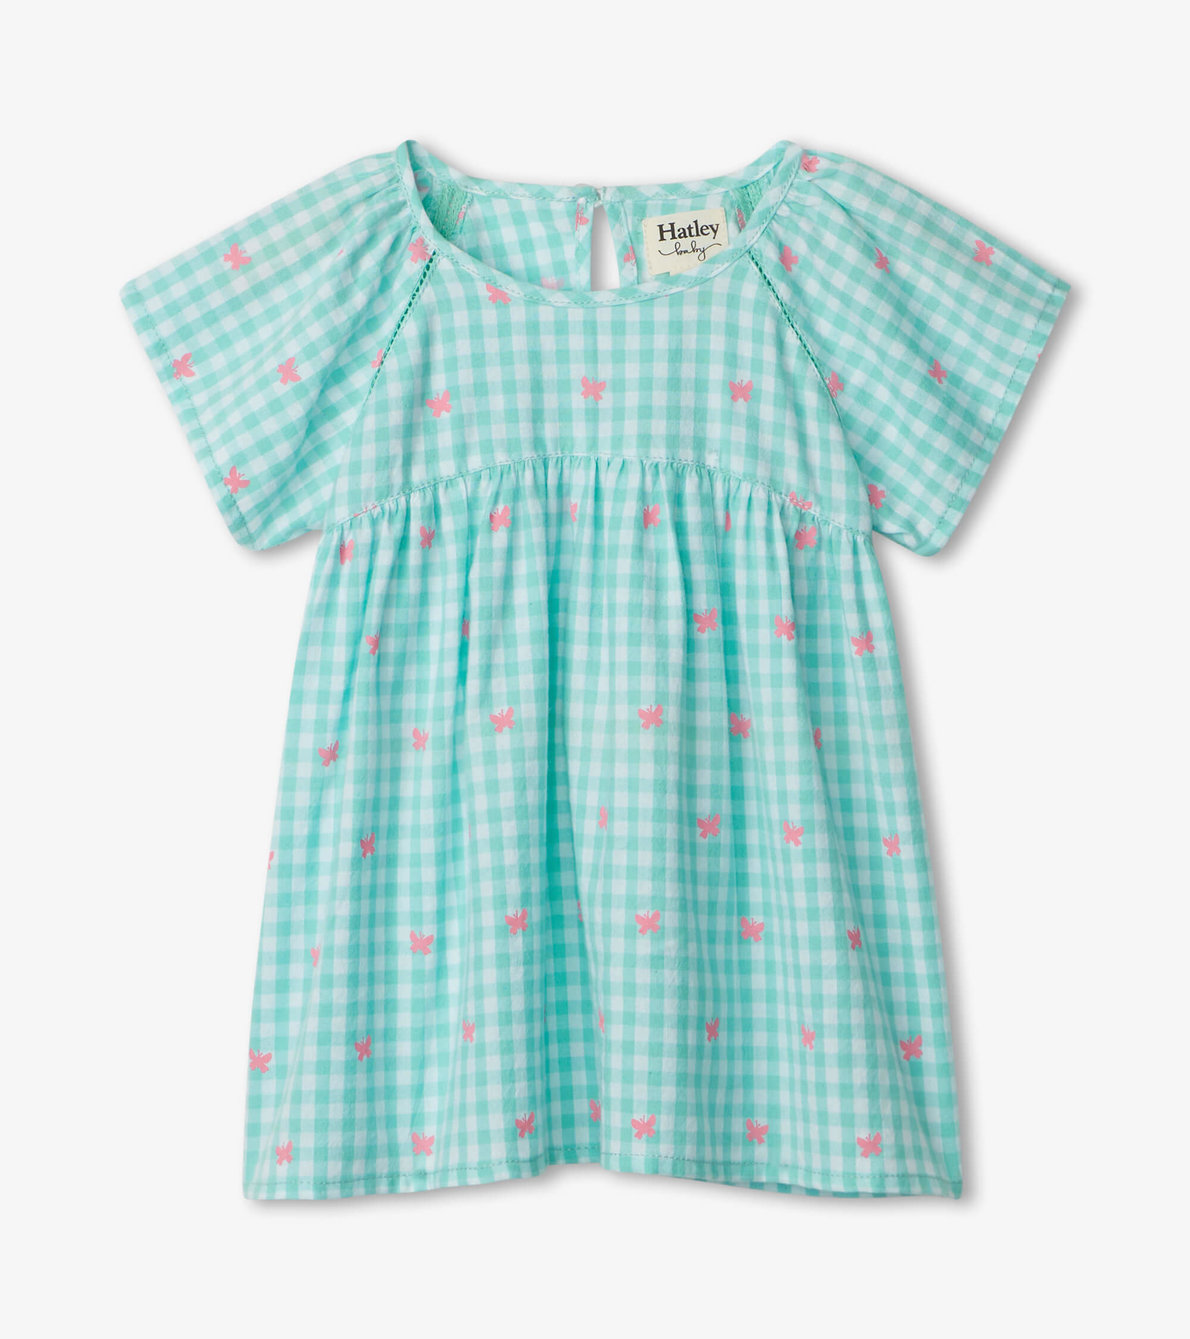 View larger image of Butterfly Gingham Baby Woven Dress